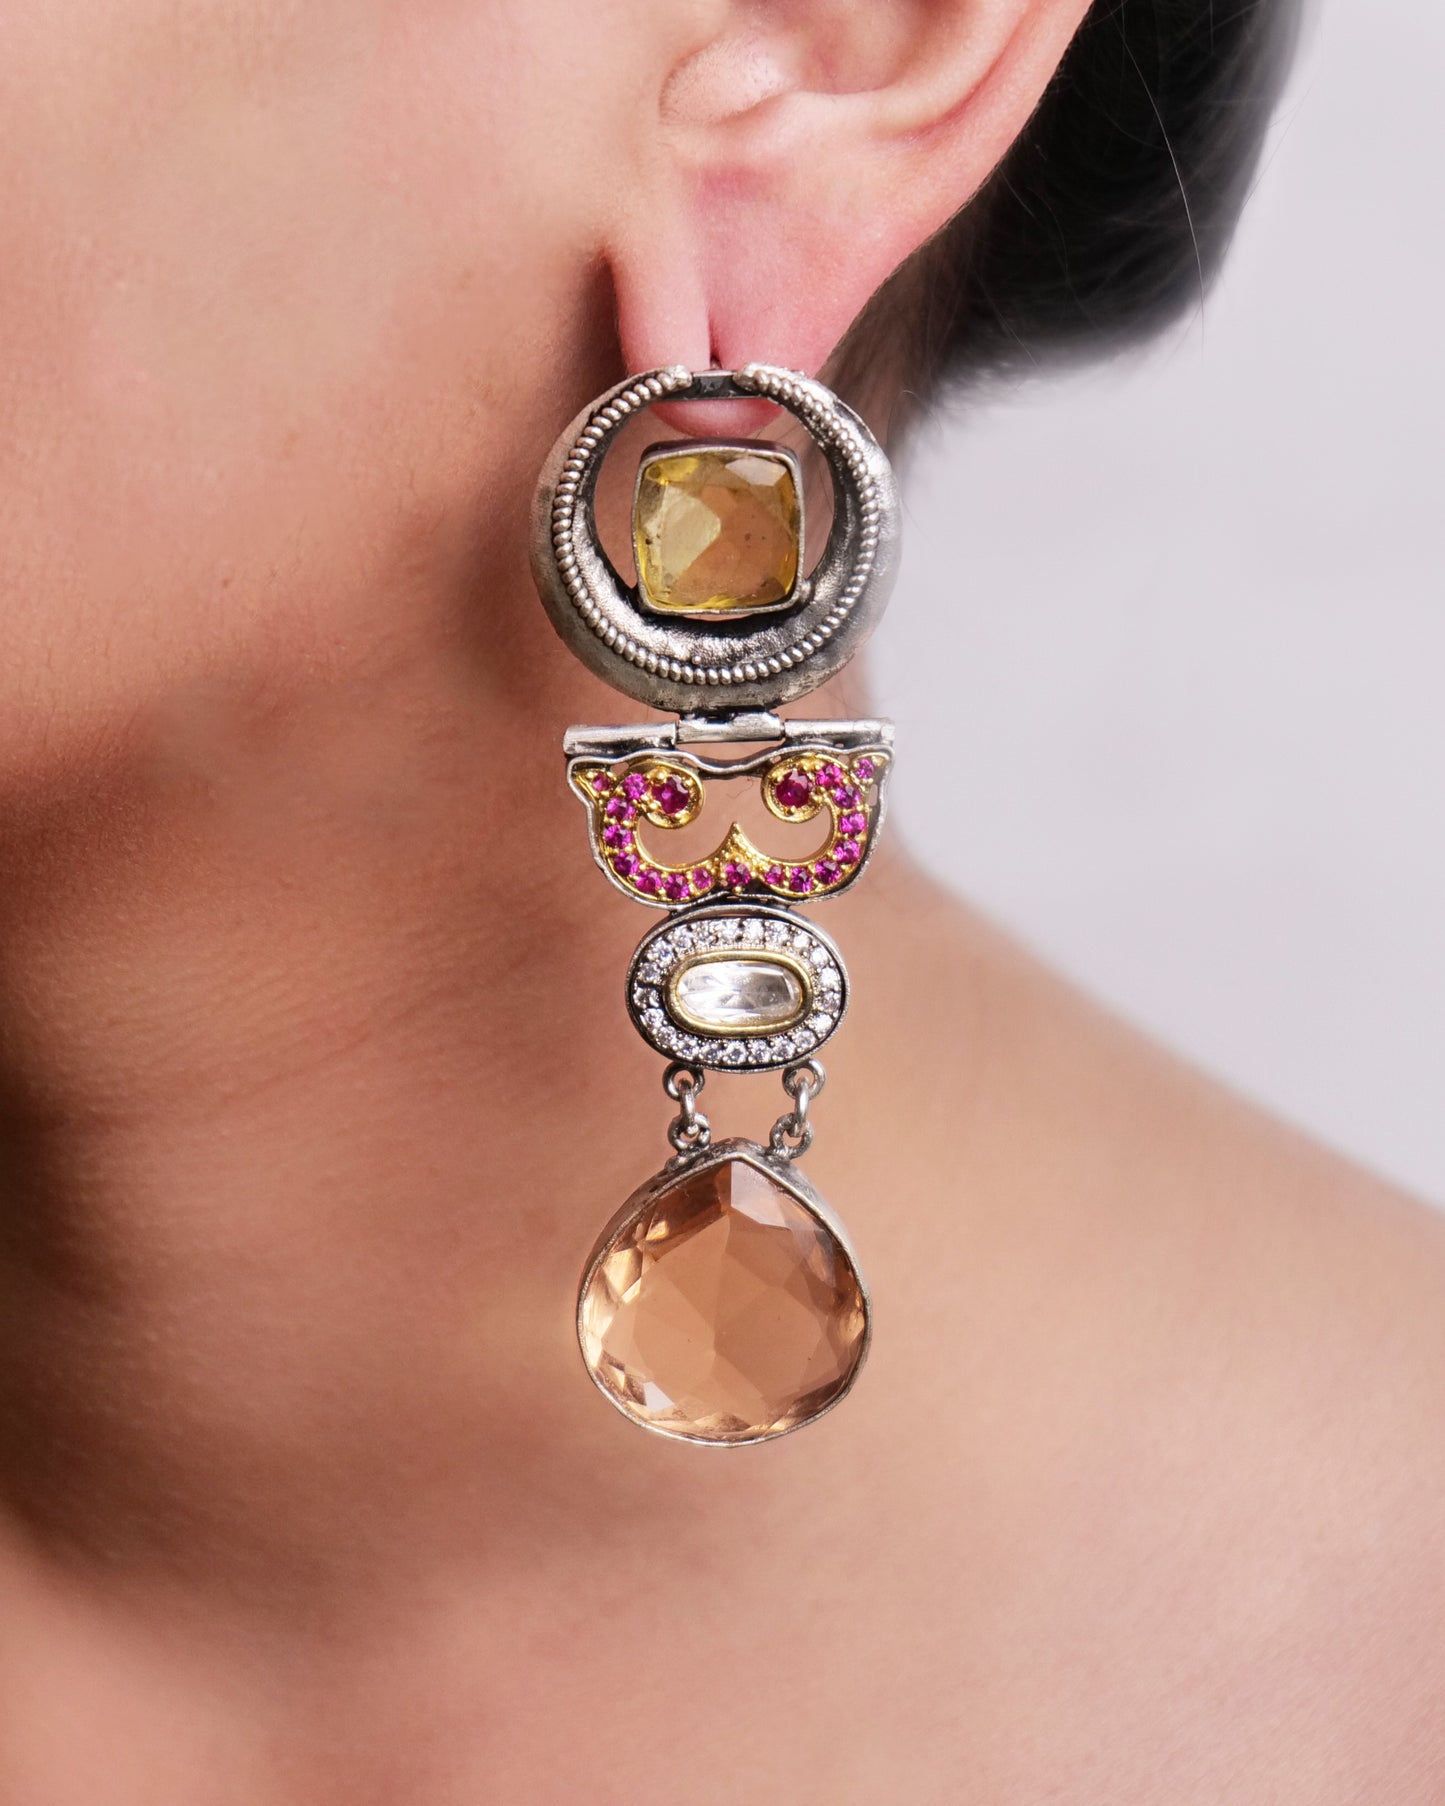 Statement earrings in peach and pink stones